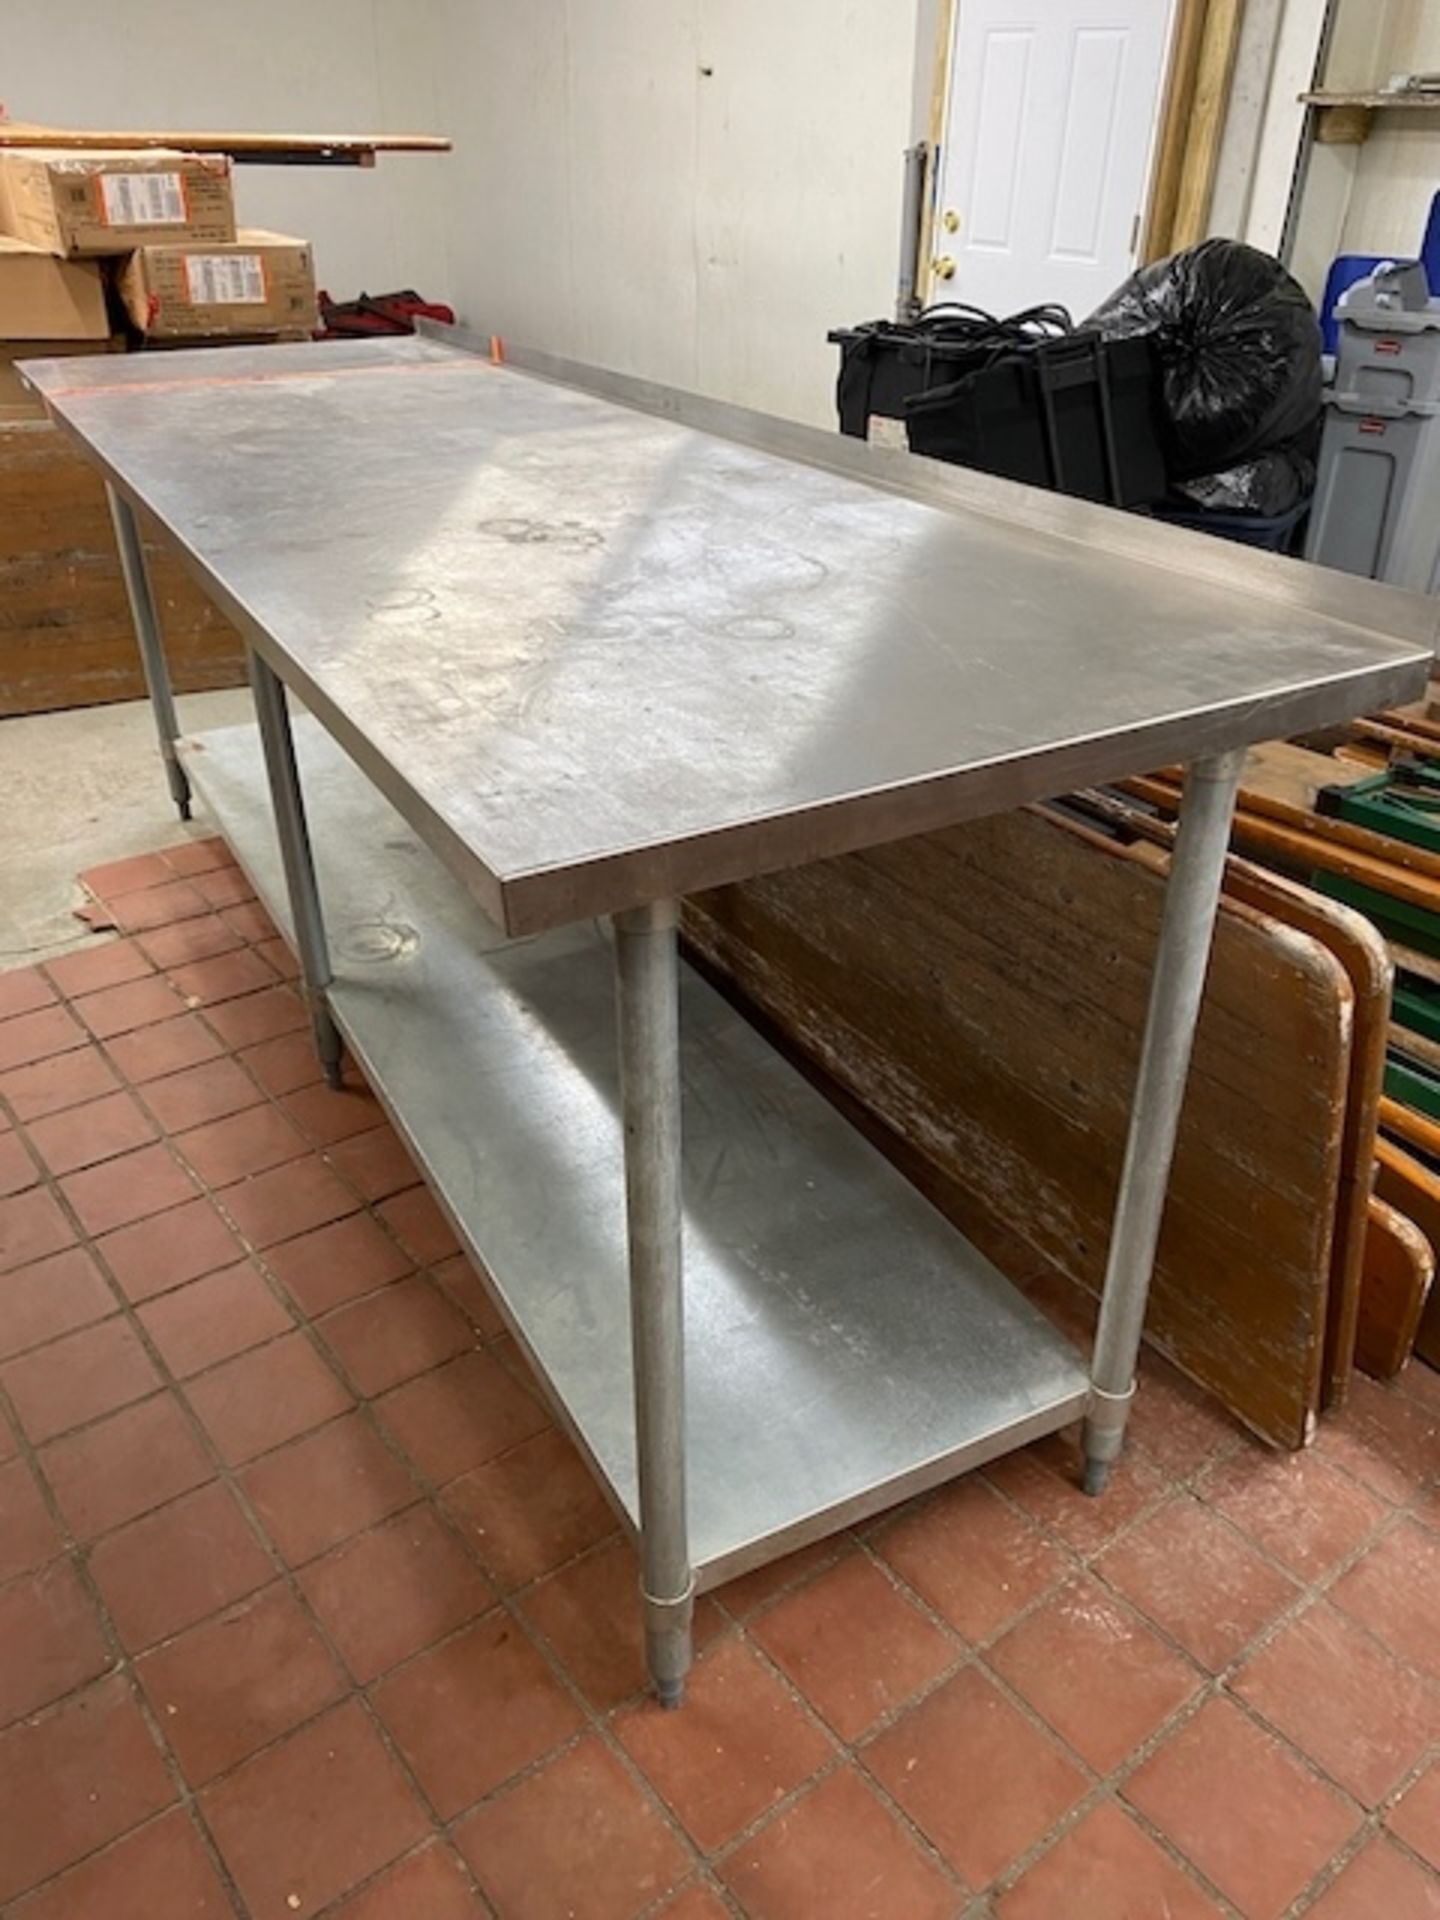 Approx 8' Stainless Steel Table | Rig Fee $35